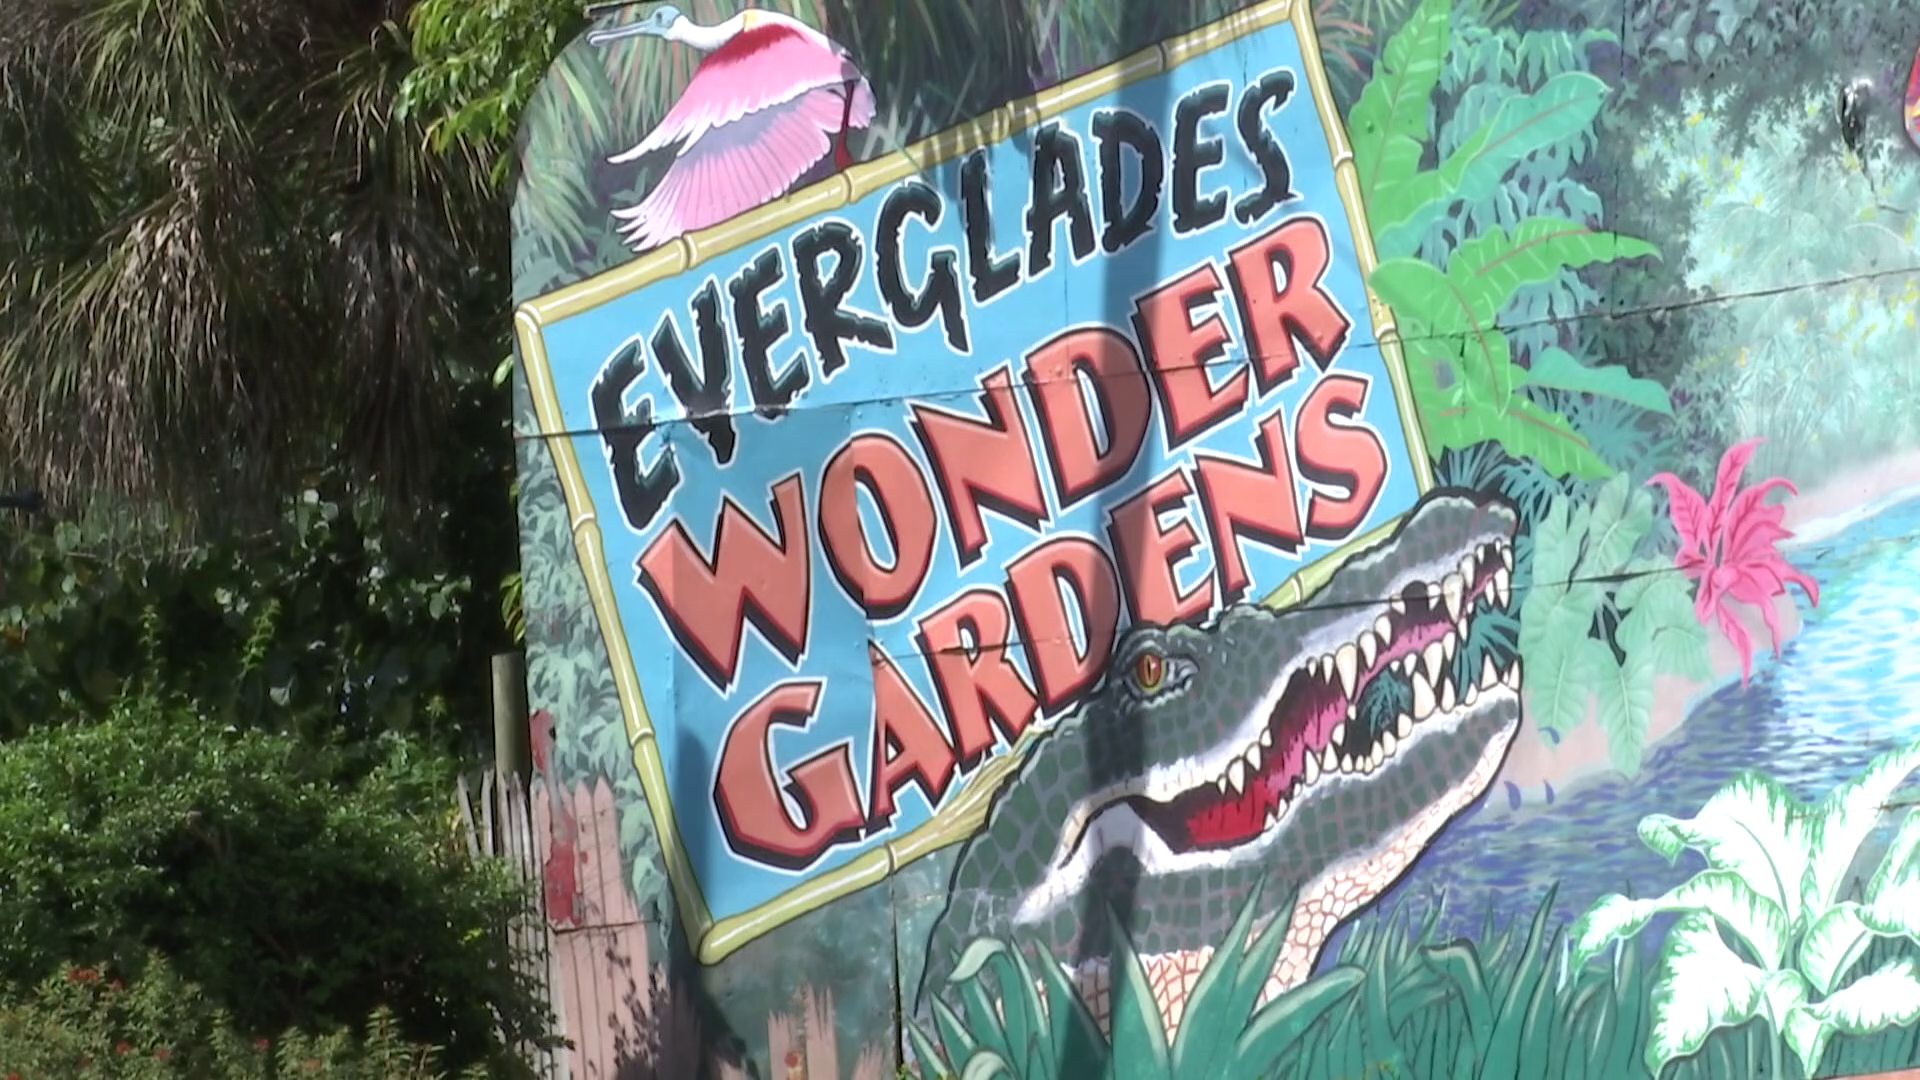 Families upset they weren't told about the demolition of a historic building in Bonita Springs are fighting back, organizing a protest to keep the old Everglades Wonder Gardens restaurant.